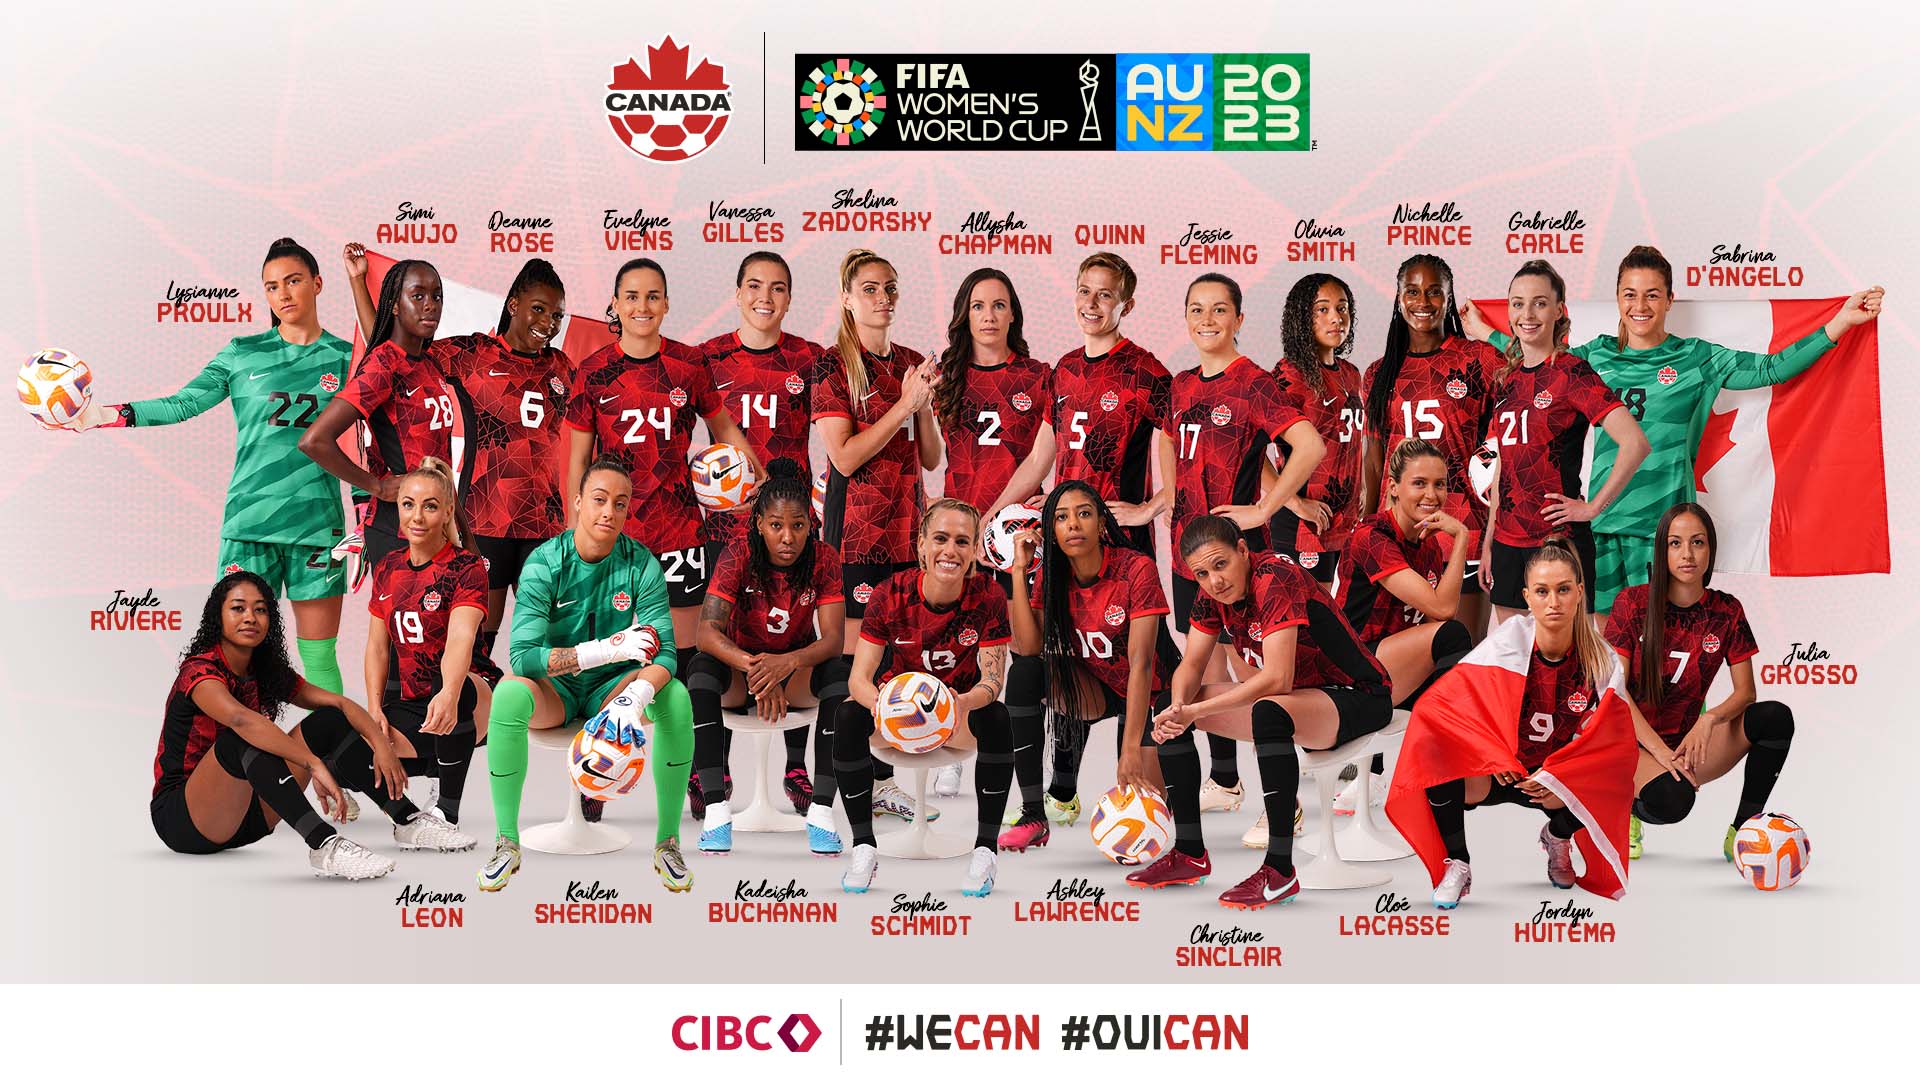 Canadas National Women's Soccer Team advertising promo. Picture of the team lined up in red uniforms.